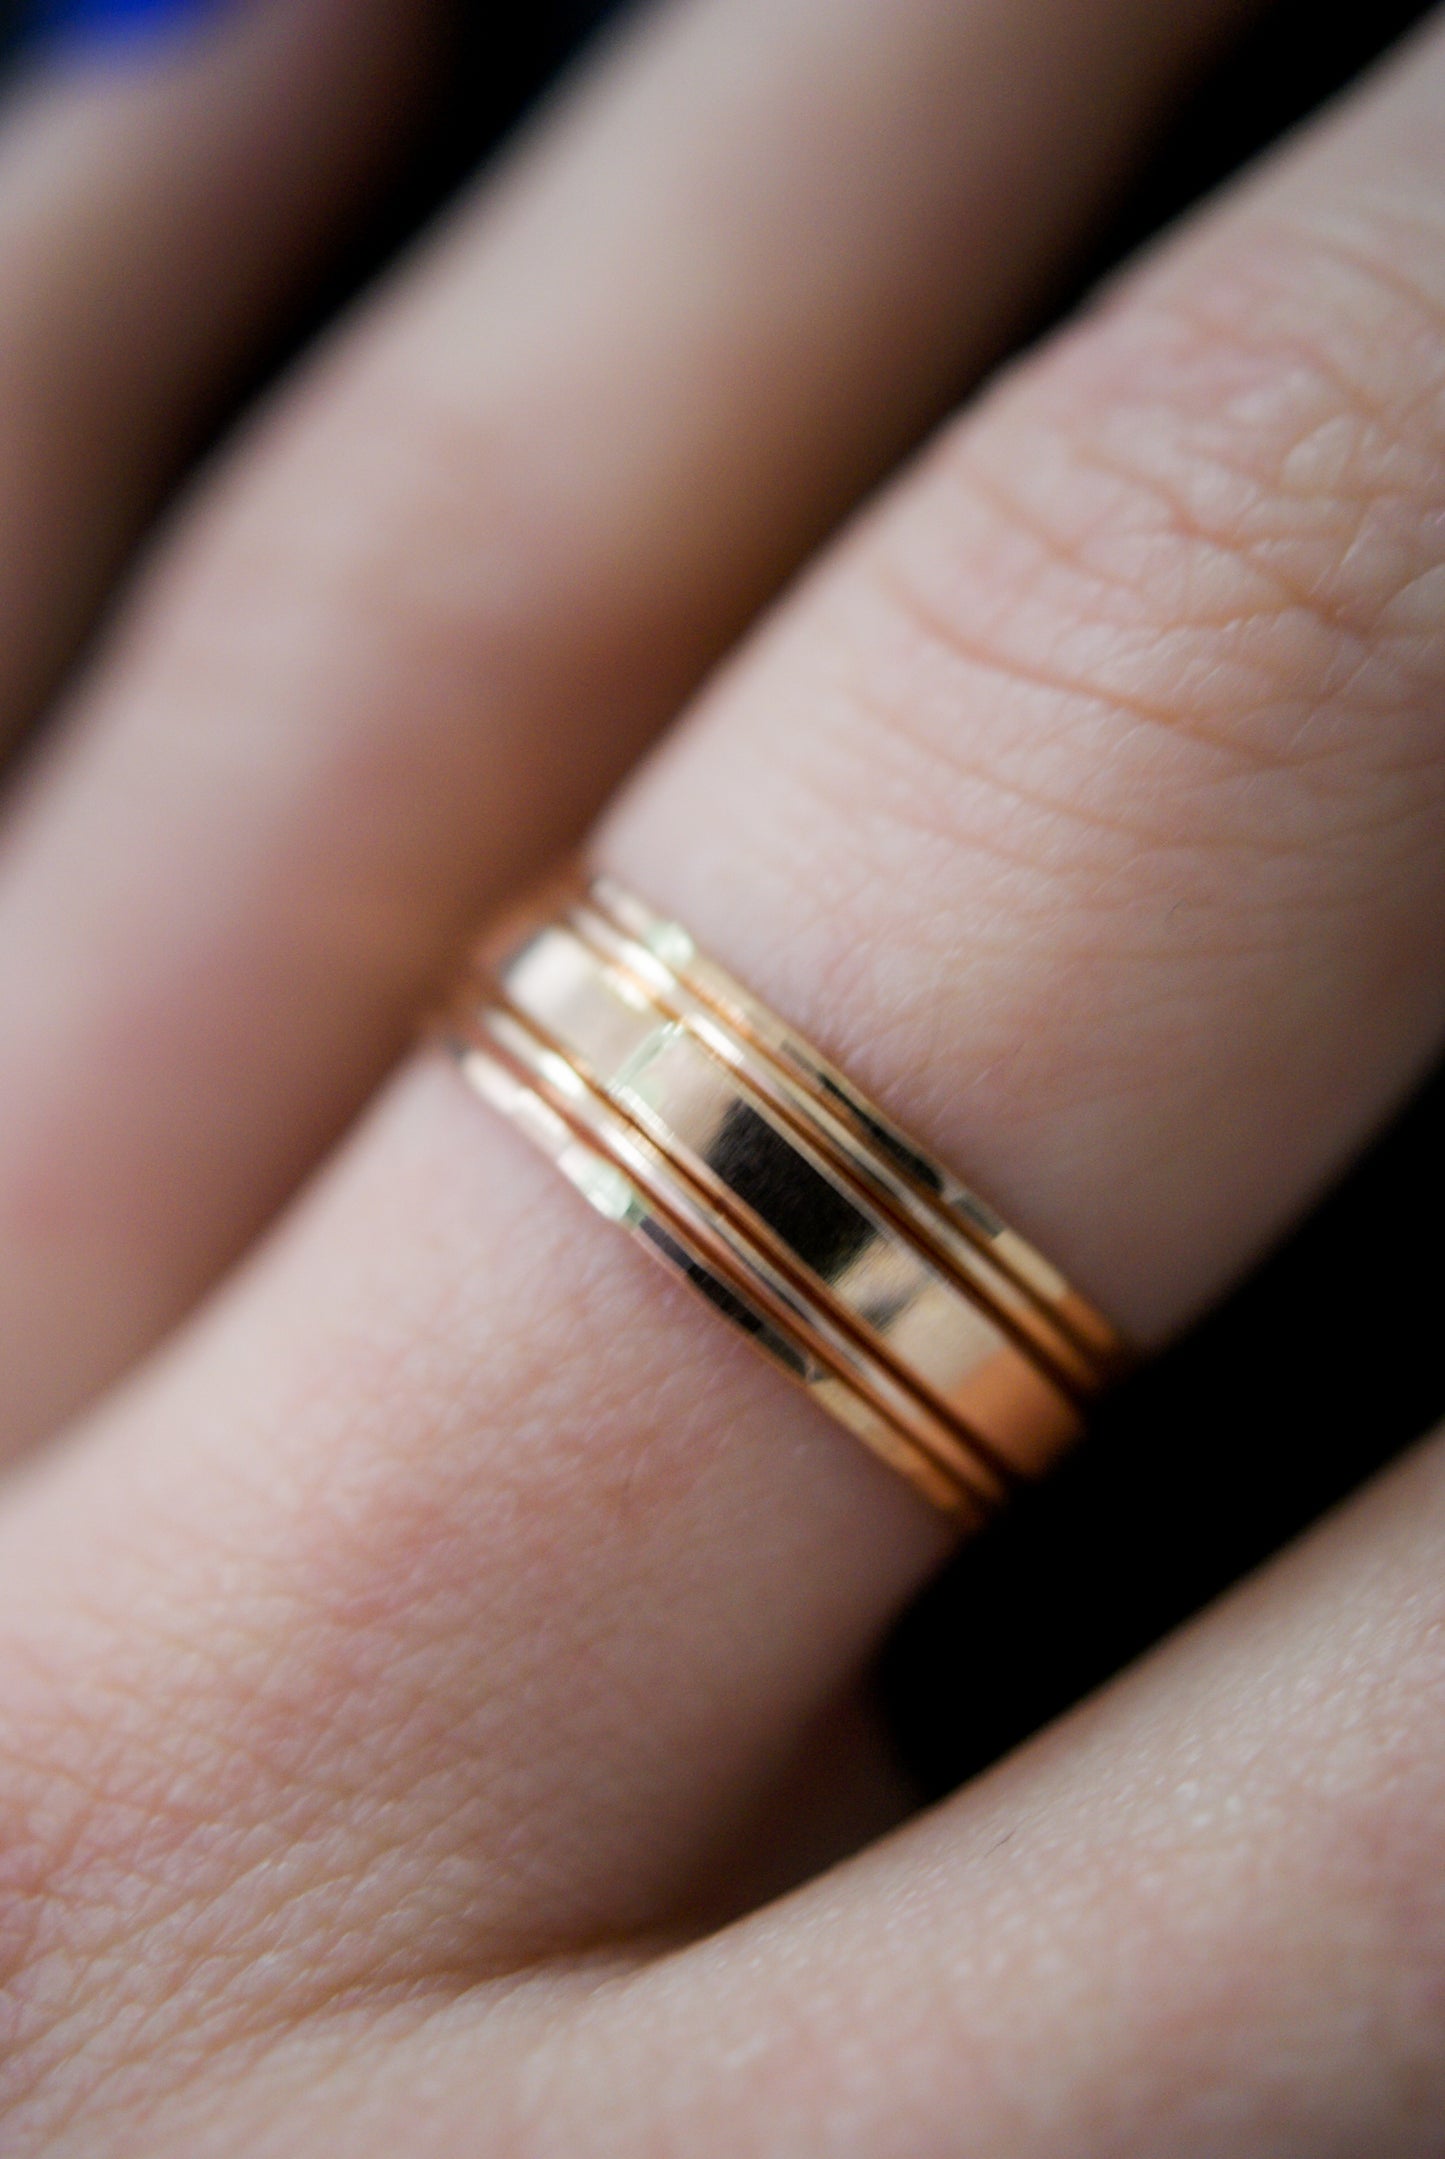 The Minimal Mirror Set of 5 Stacking Rings, Gold Fill, Rose Gold Fill or Sterling Silver